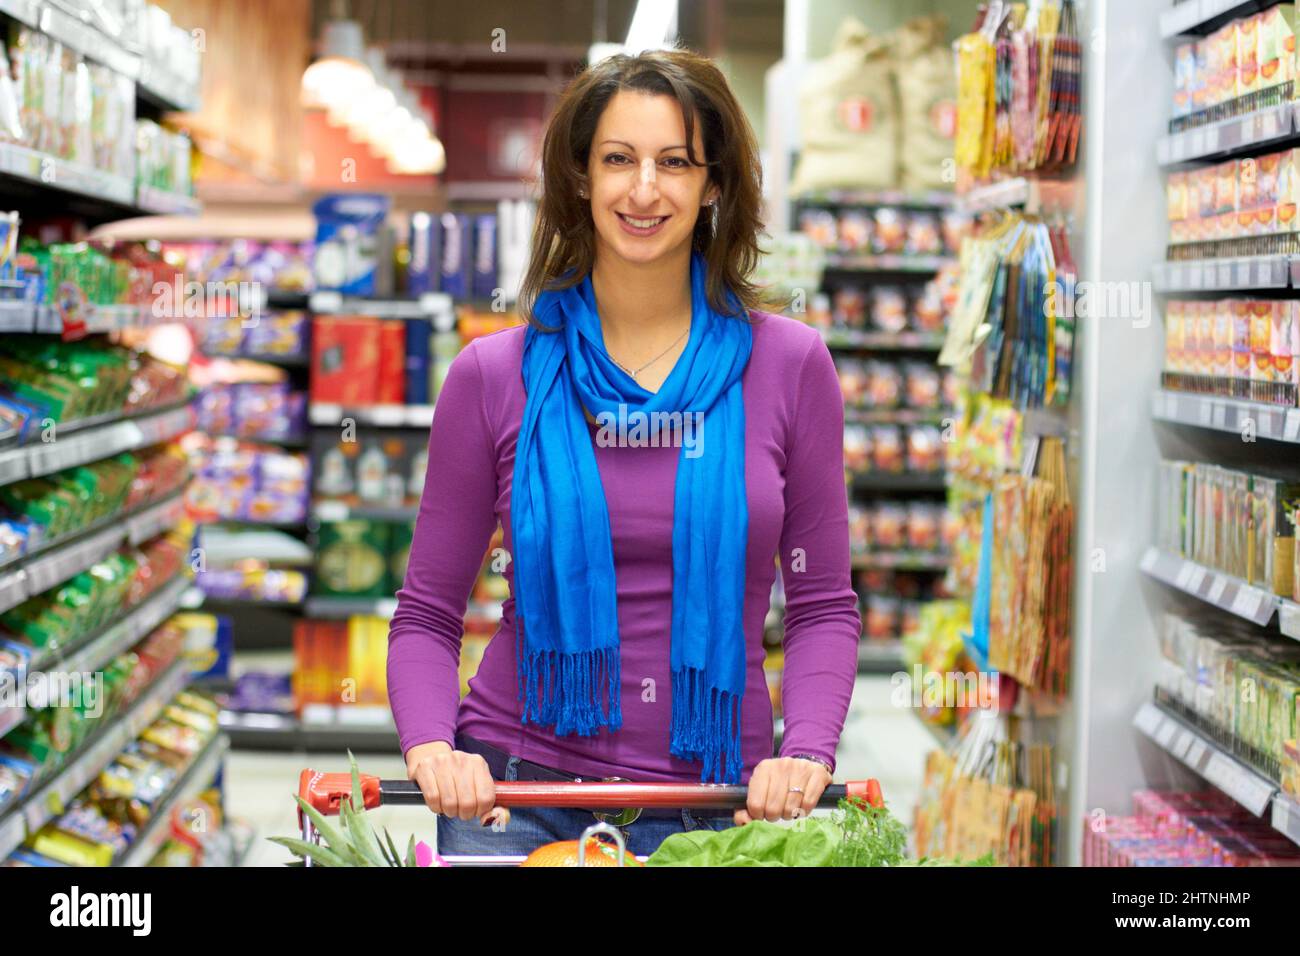 Luxury of many choices. A woman pushing her shopping cart in a grocery store. Stock Photo